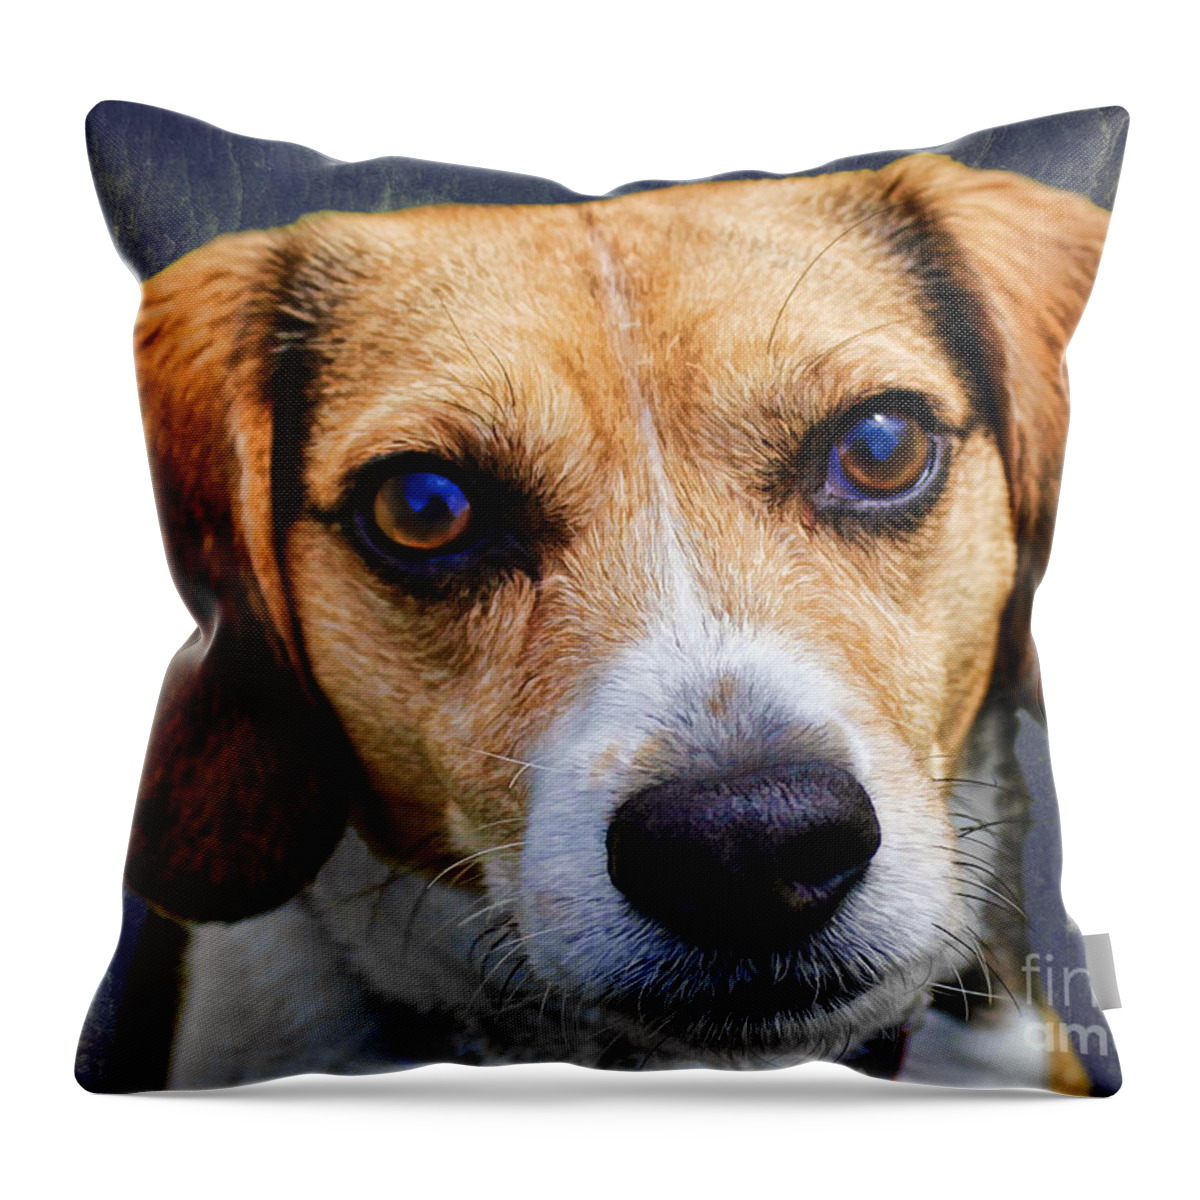 Beagle Throw Pillow featuring the photograph My Name Is Moose by Barbara McMahon